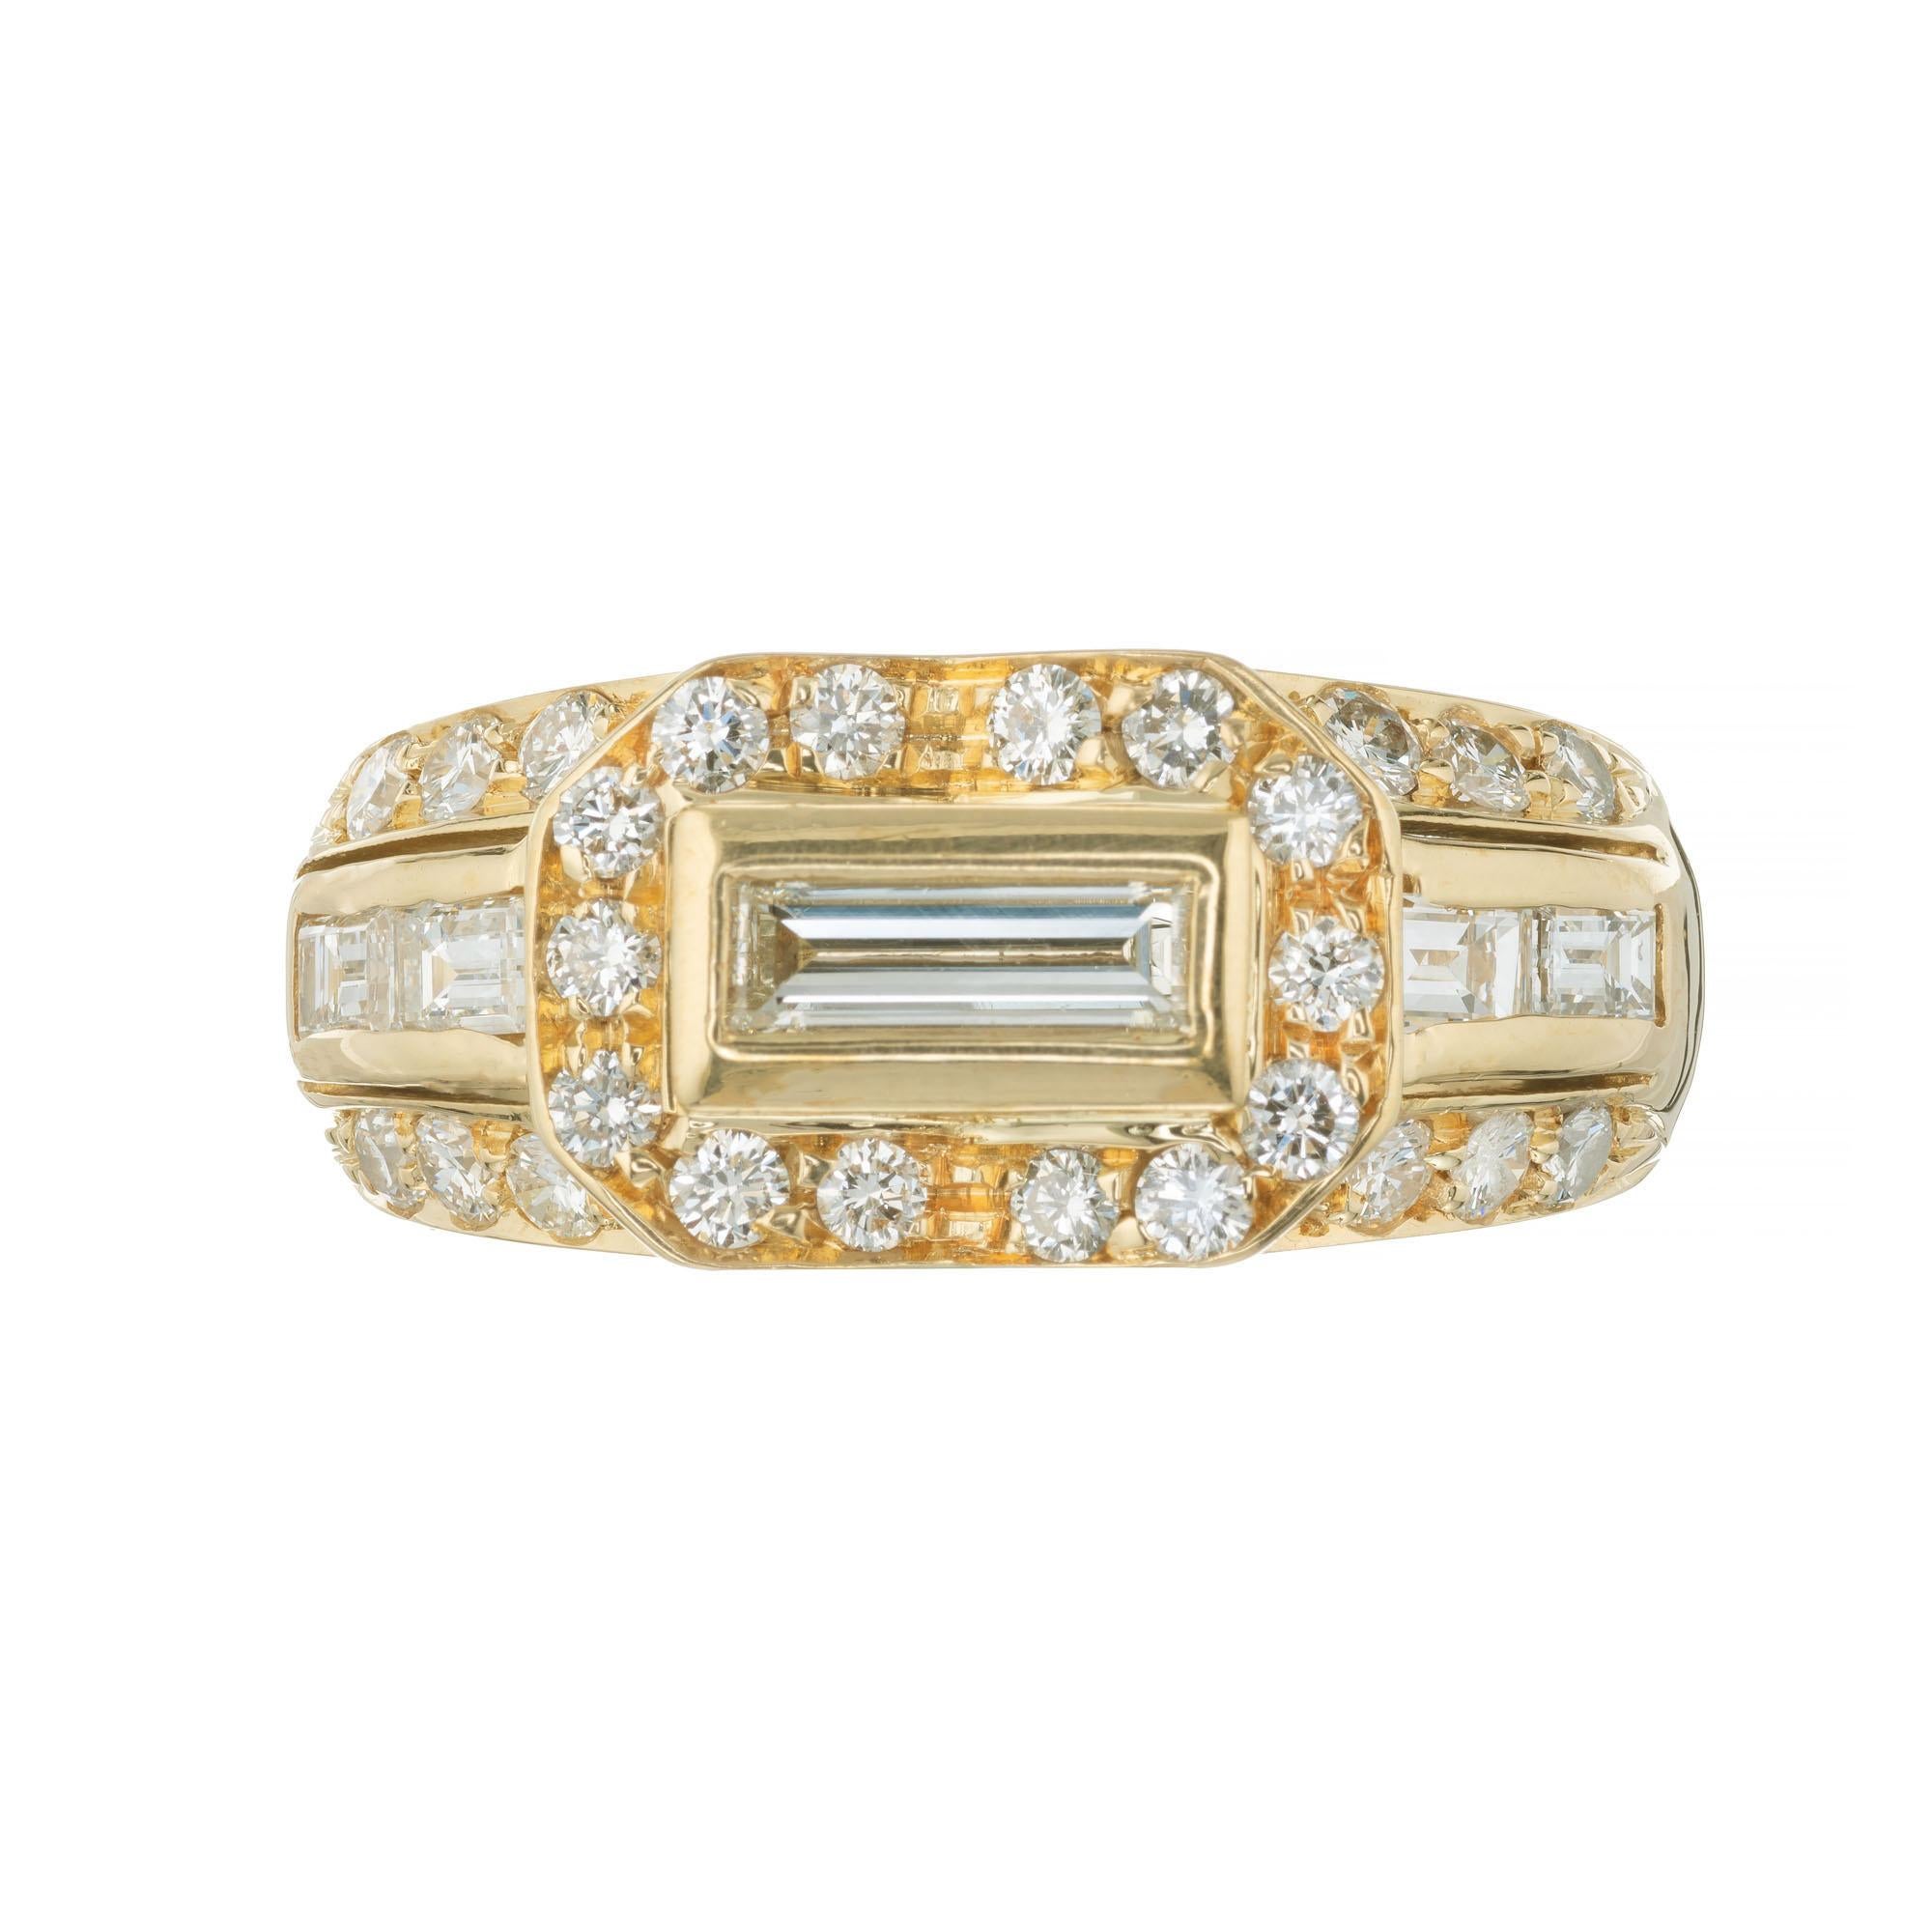 Very stylish contoured 18k yellow gold ring set with baguette and round diamonds

1 step cut baguette H VS, approx. .27ct
26 round brilliant cut diamonds G-H VS, approx. .38ct
4 step cut baguette diamonds H VS, approx. .30ct
Size 5.75 and sizable